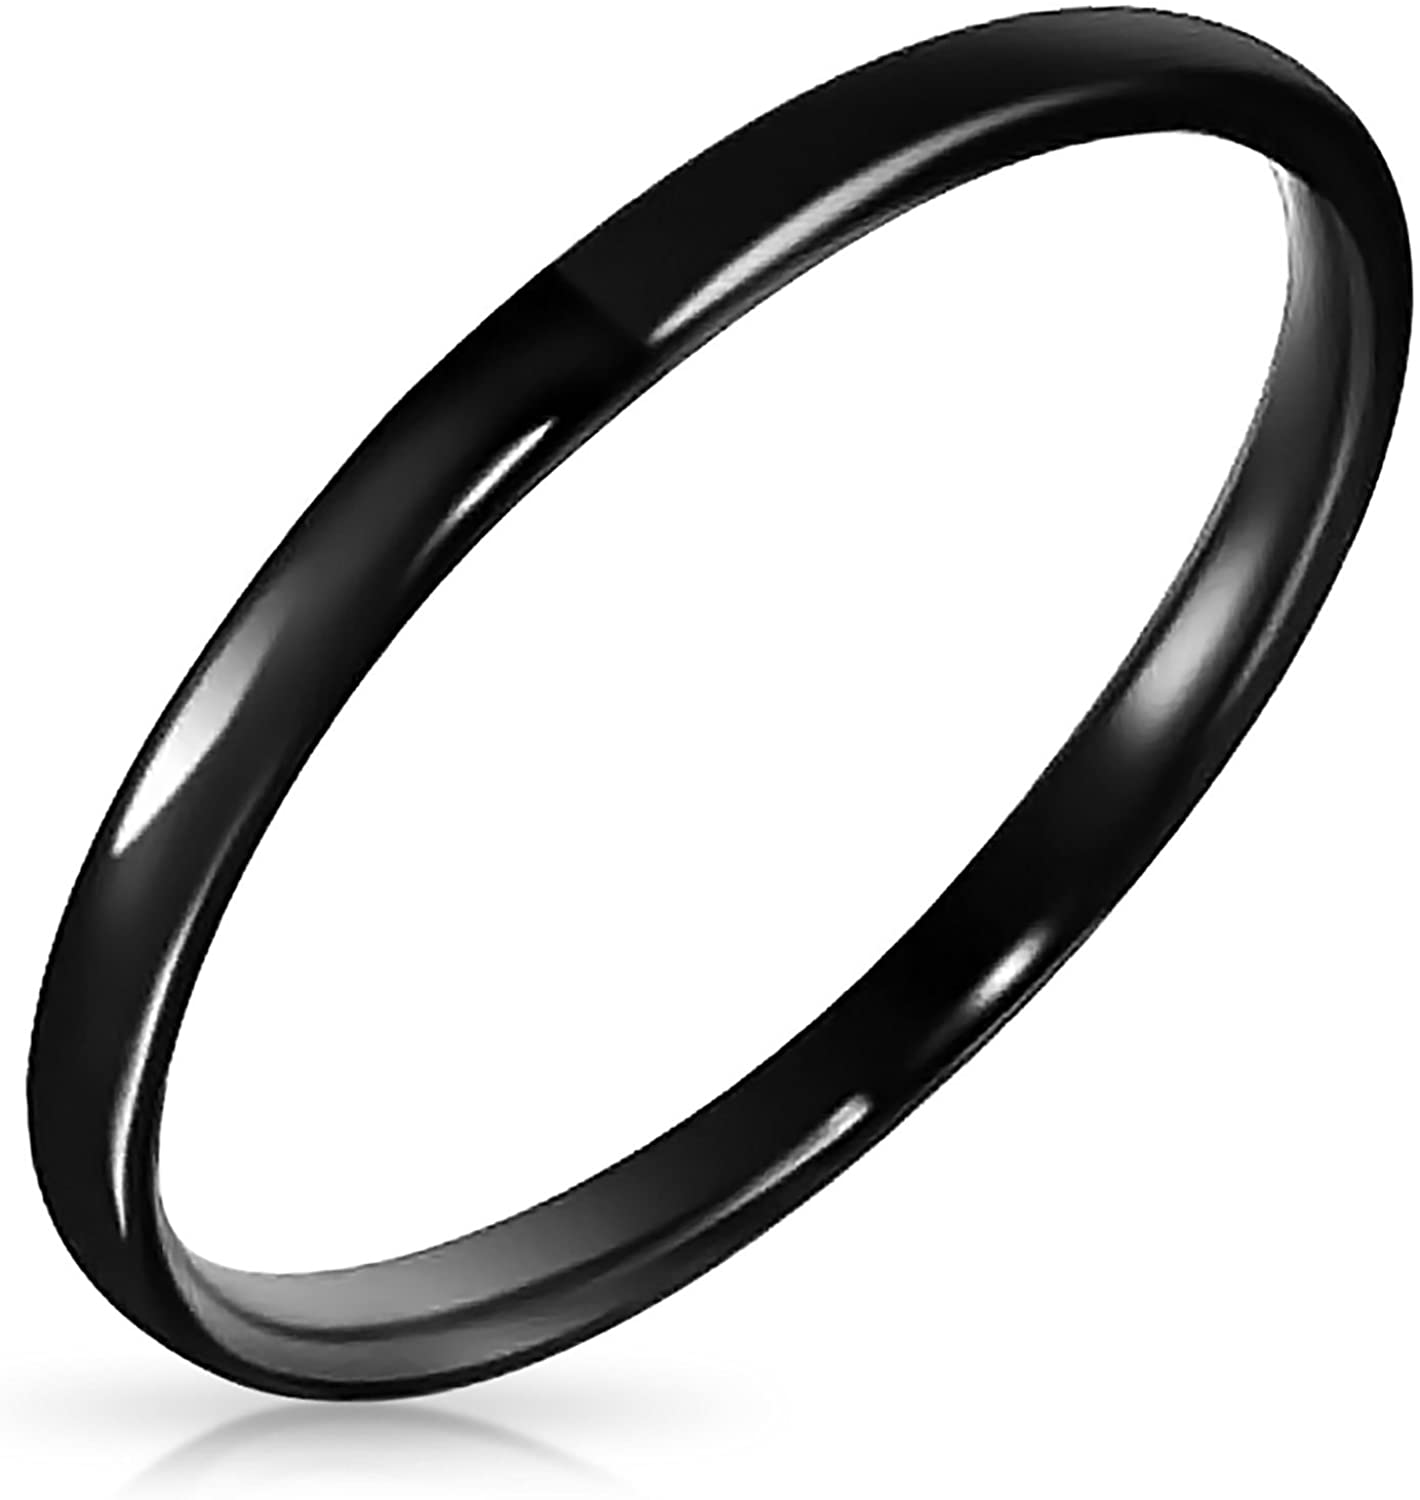 3.5” Heavy Black Ring On Rope Ring